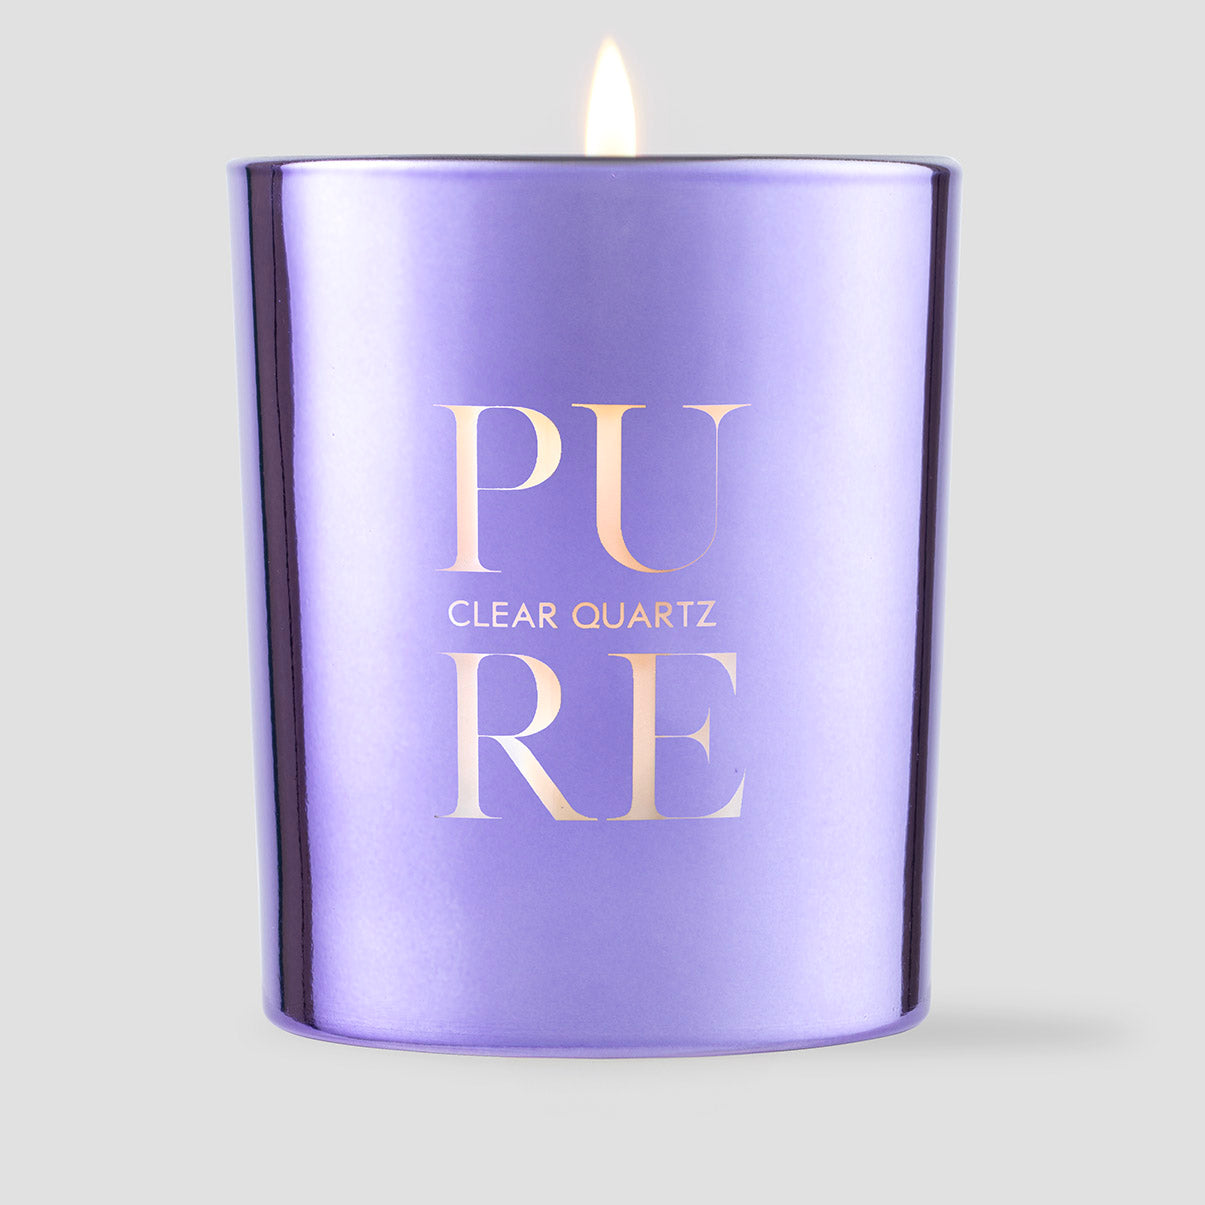 The PURE Candle